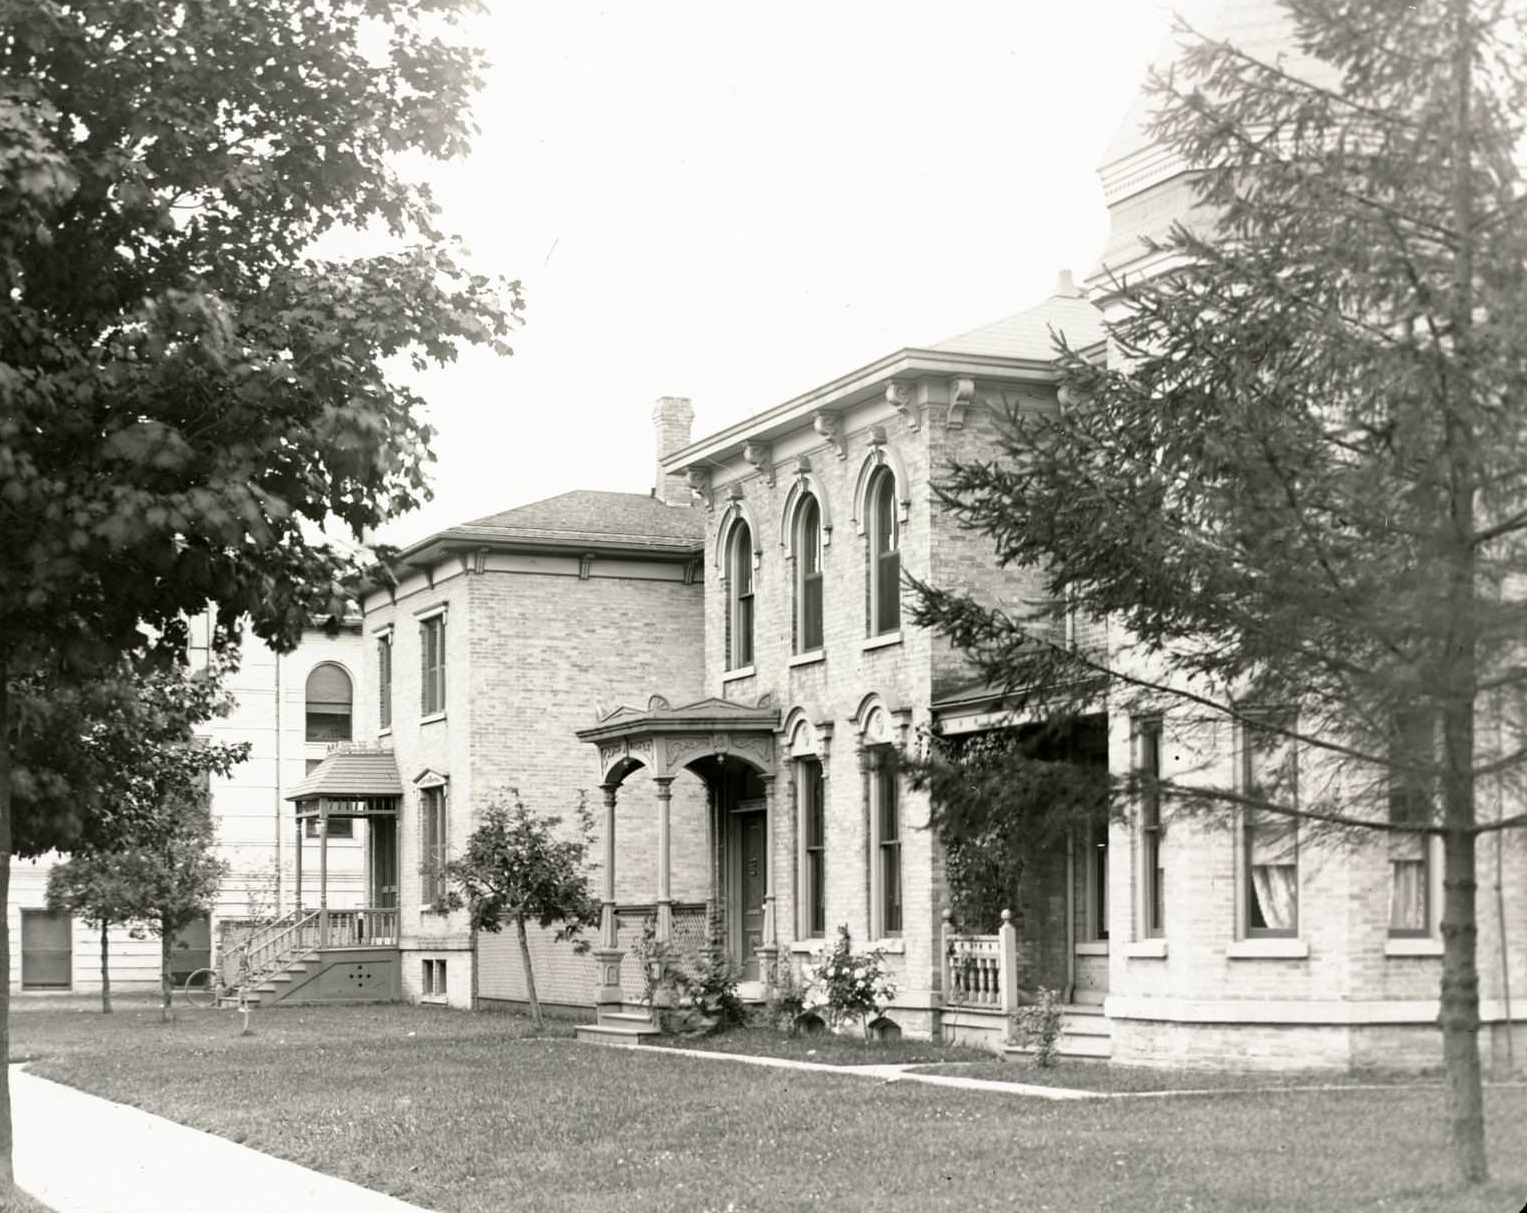 Pastor's and sisters' residences, St. George's Church, 1890